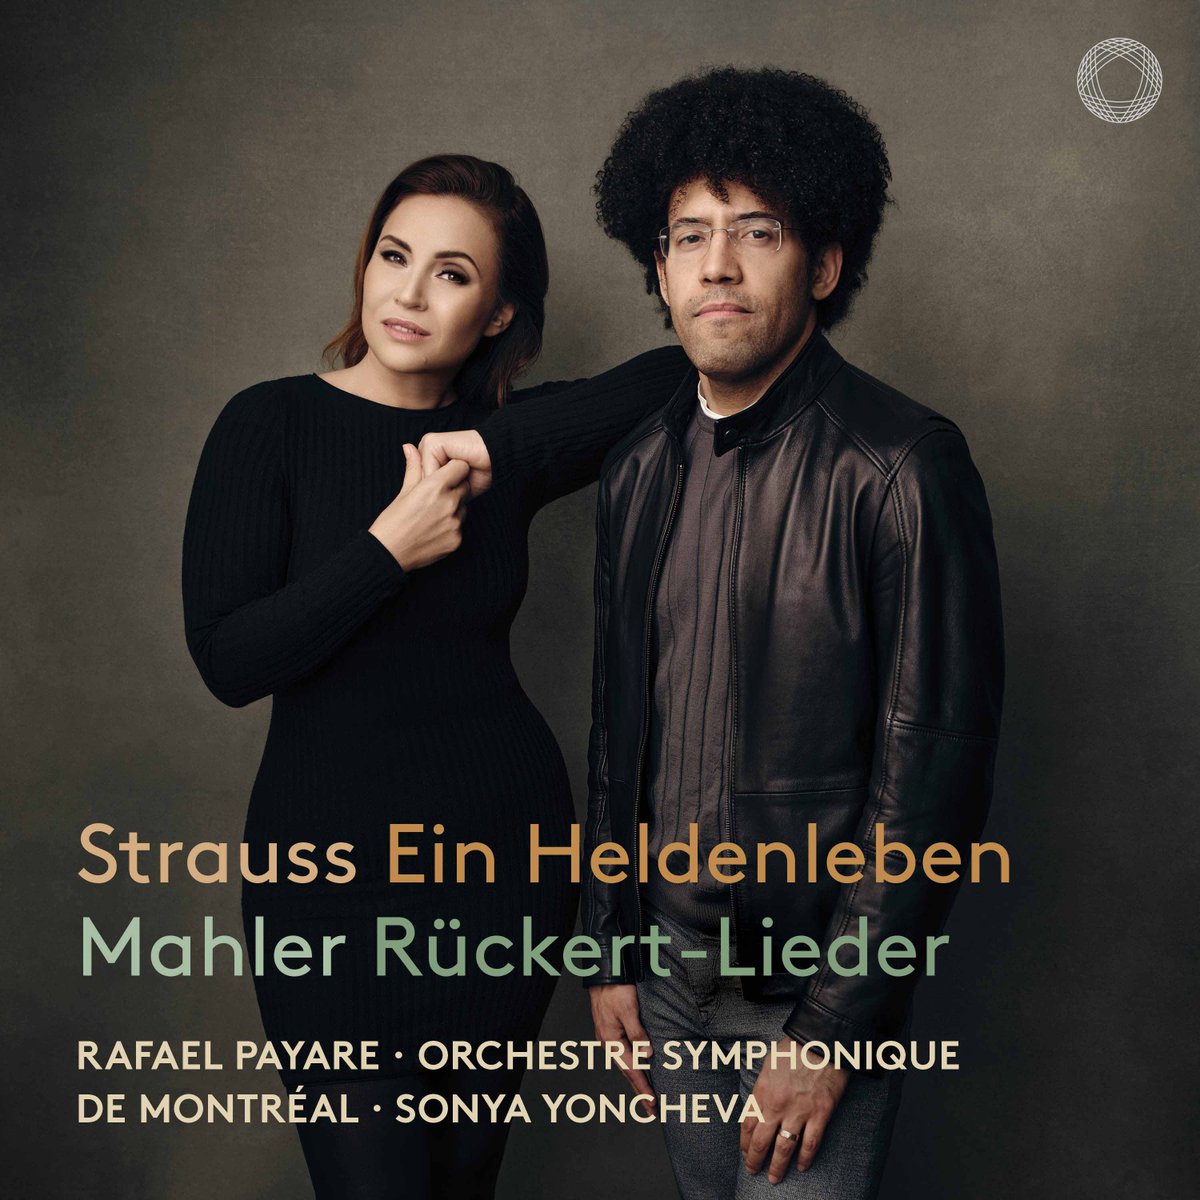 The @OSMconcerts and its Music Director @rafaelpayare extend their Pentatone discography with a recording of Strauss’s ‘Ein Heldenleben’ and Gustav Mahler’s ‘Rückert-Lieder’, sung by star soprano @sonyayoncheva. RELEASED TODAY, LISTEN NOW! 🎶lnk.to/StraussMahlerO…